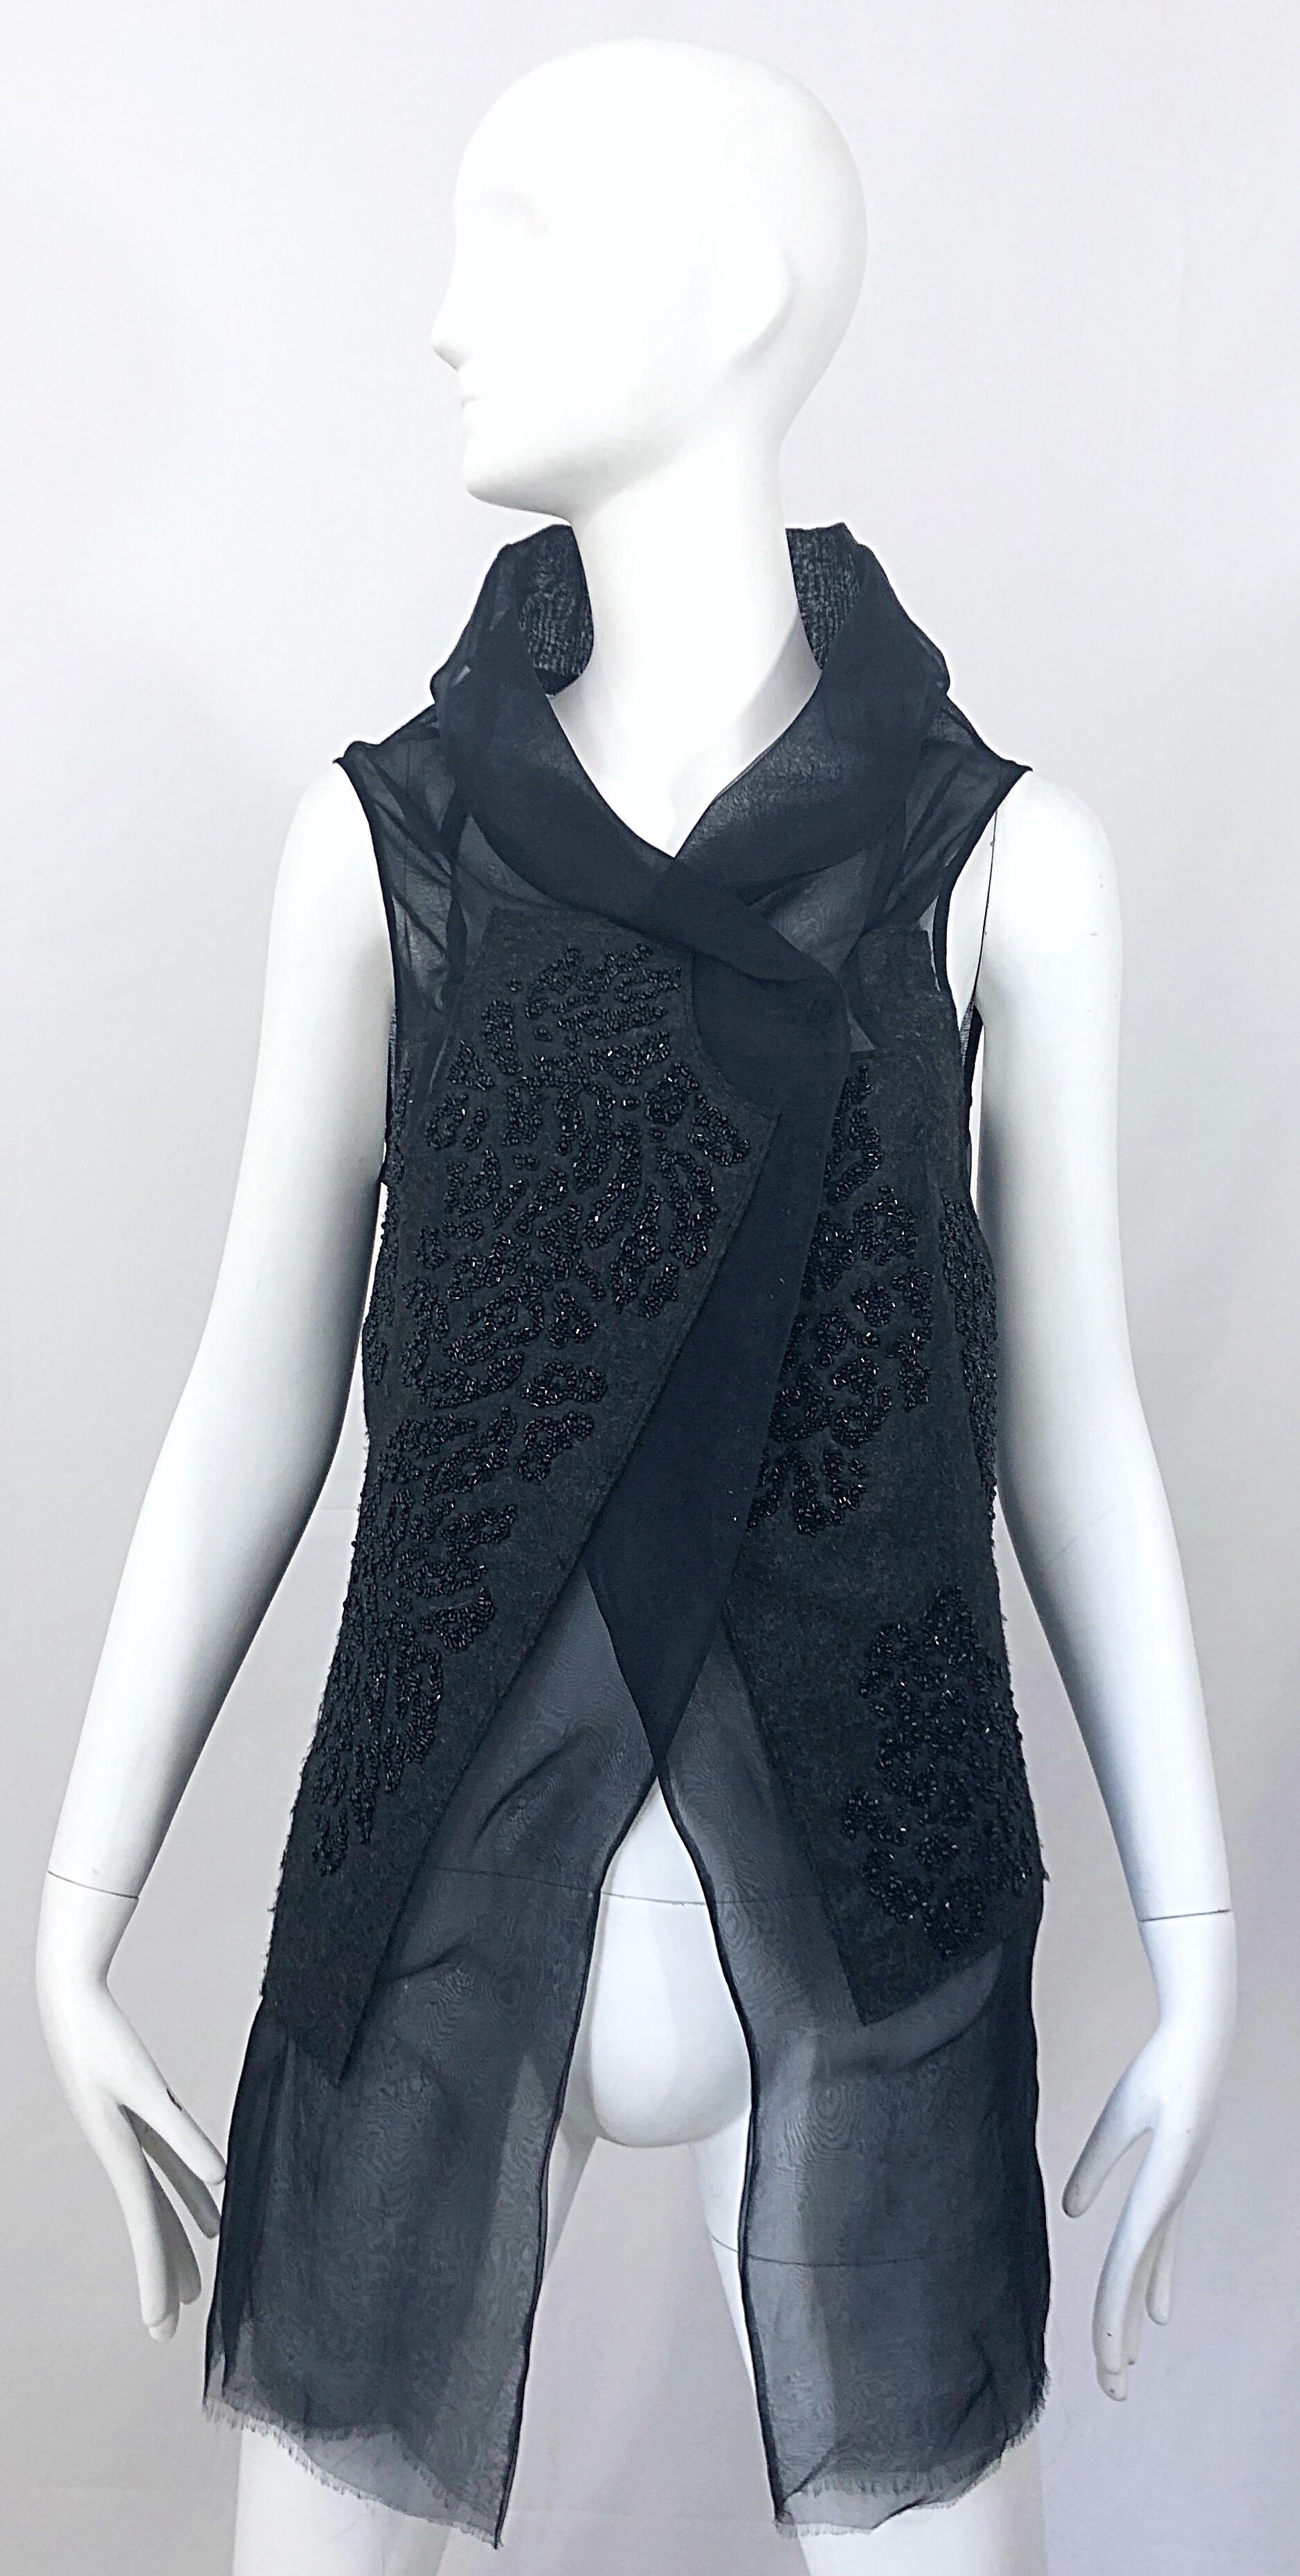 Rare PEACHOO + KREJBERG black silk and linen beaded hand made top / vest! Features thousands of hand-sewn black seed beads throughout the black wool trim. Hidden snaps up the asymmetrical bodice. Avant Garde layered cowl neck. Has a very Comme des